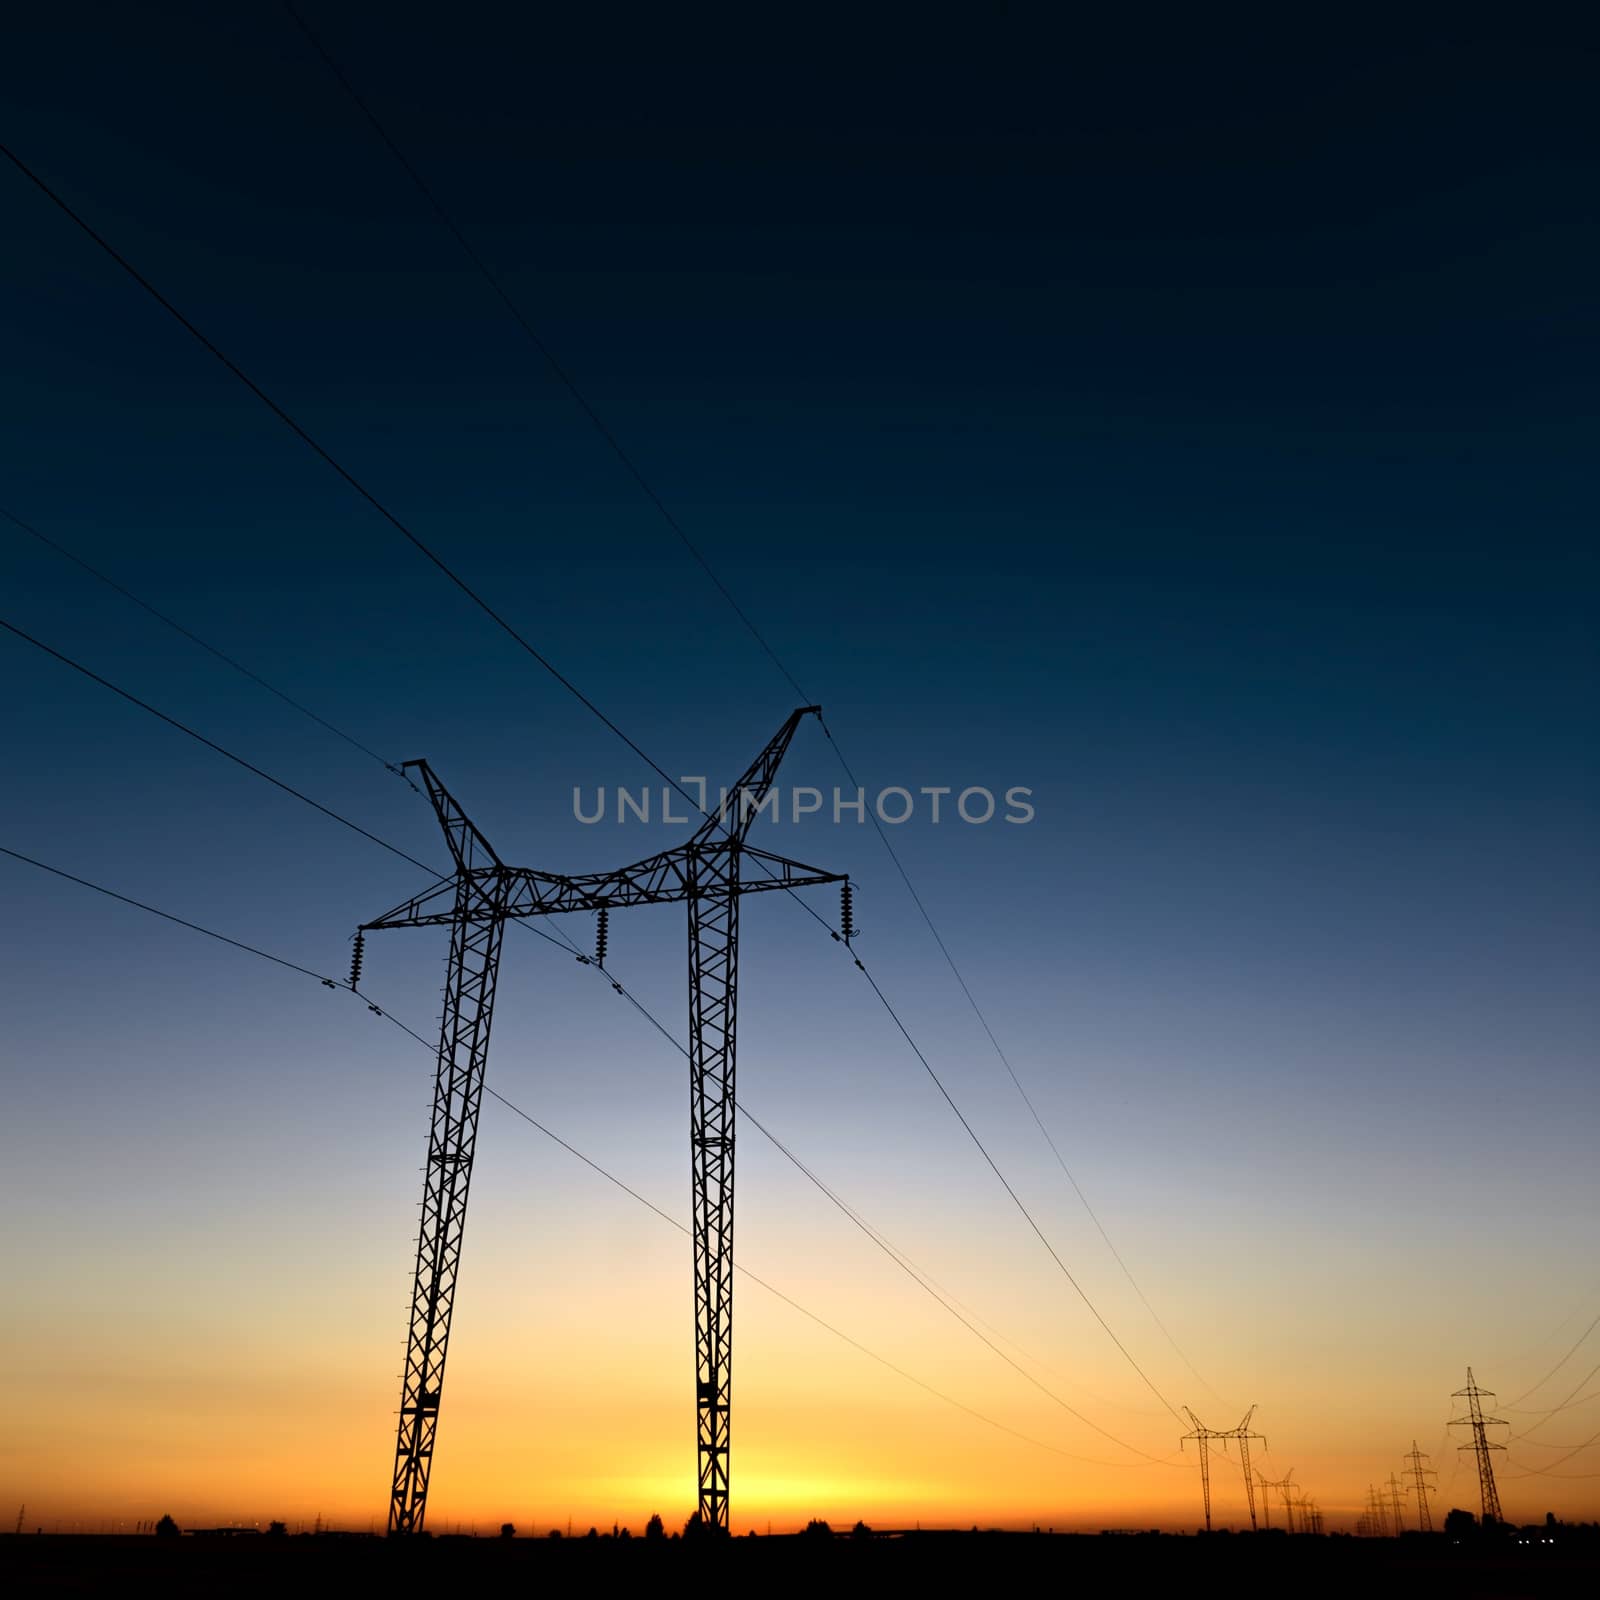 Large transmission towers at blue hour with horizon